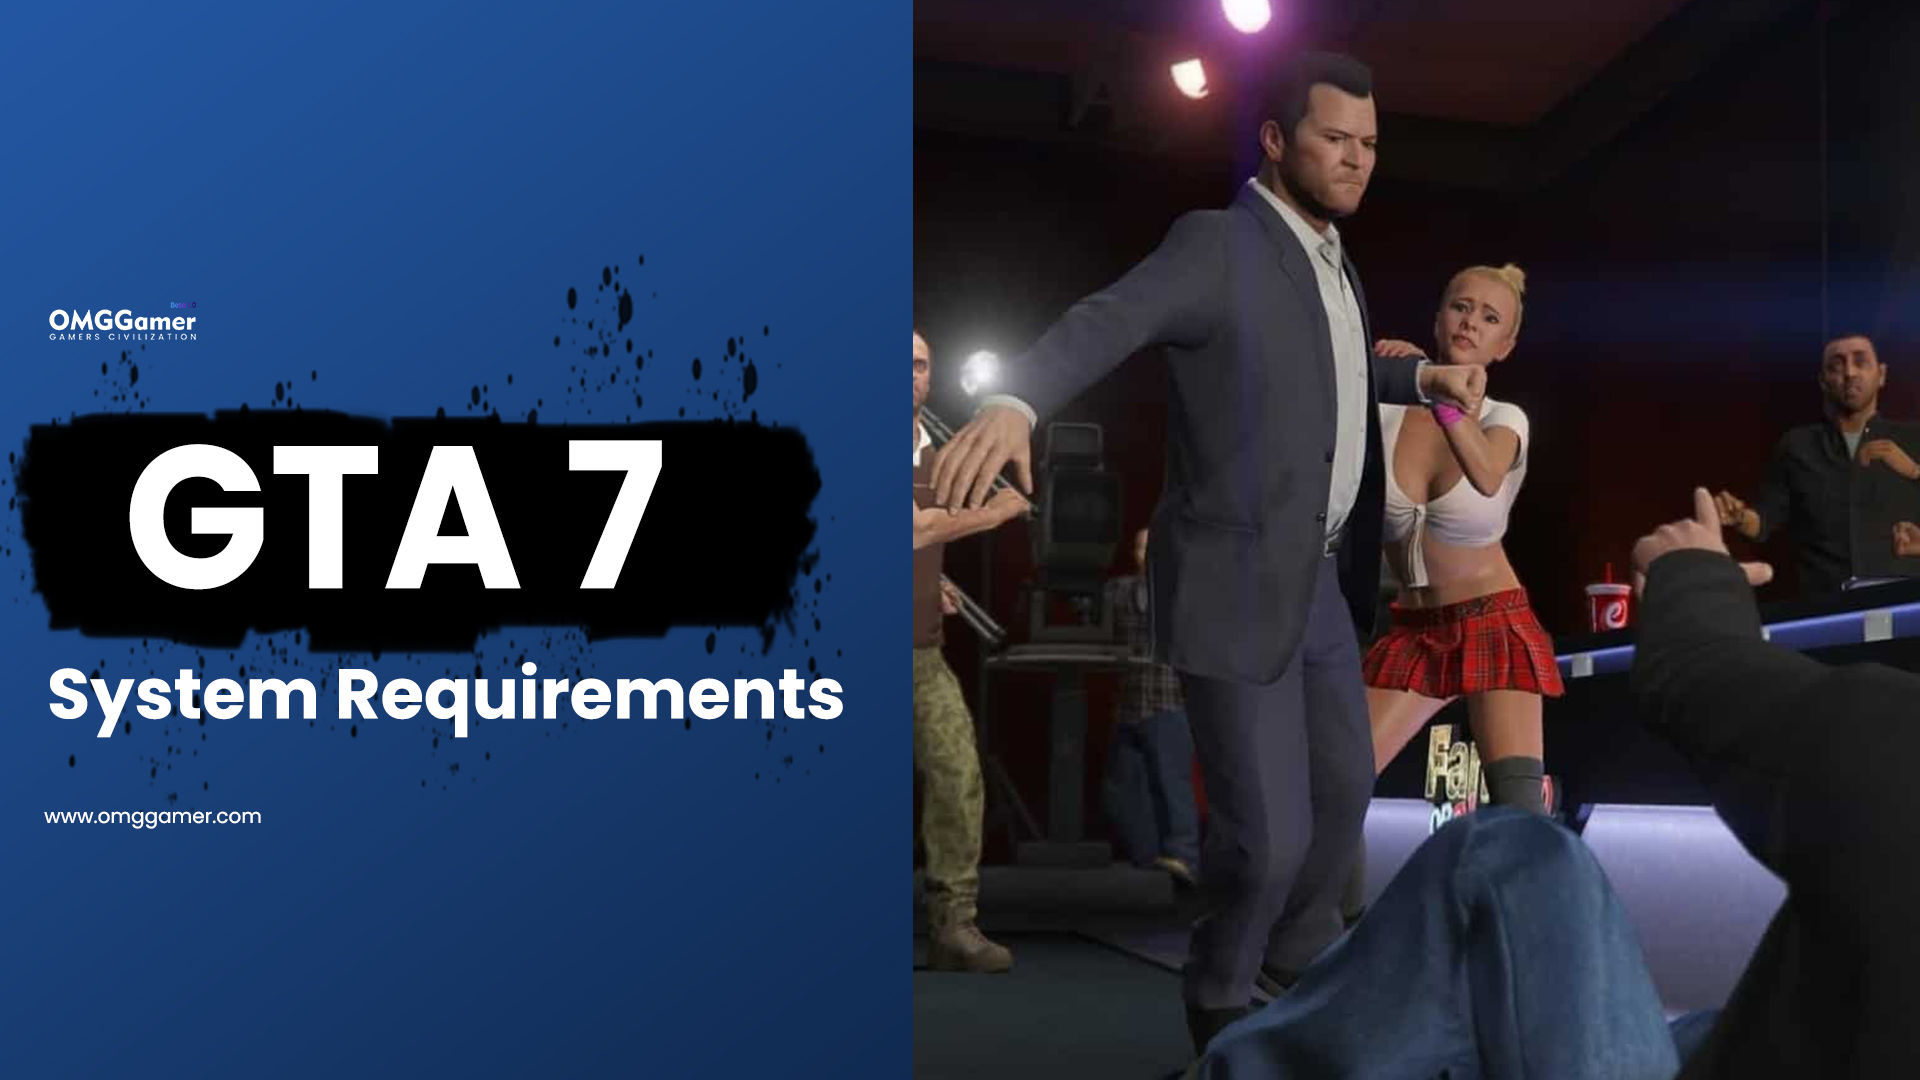 GTA 7 System Requirements